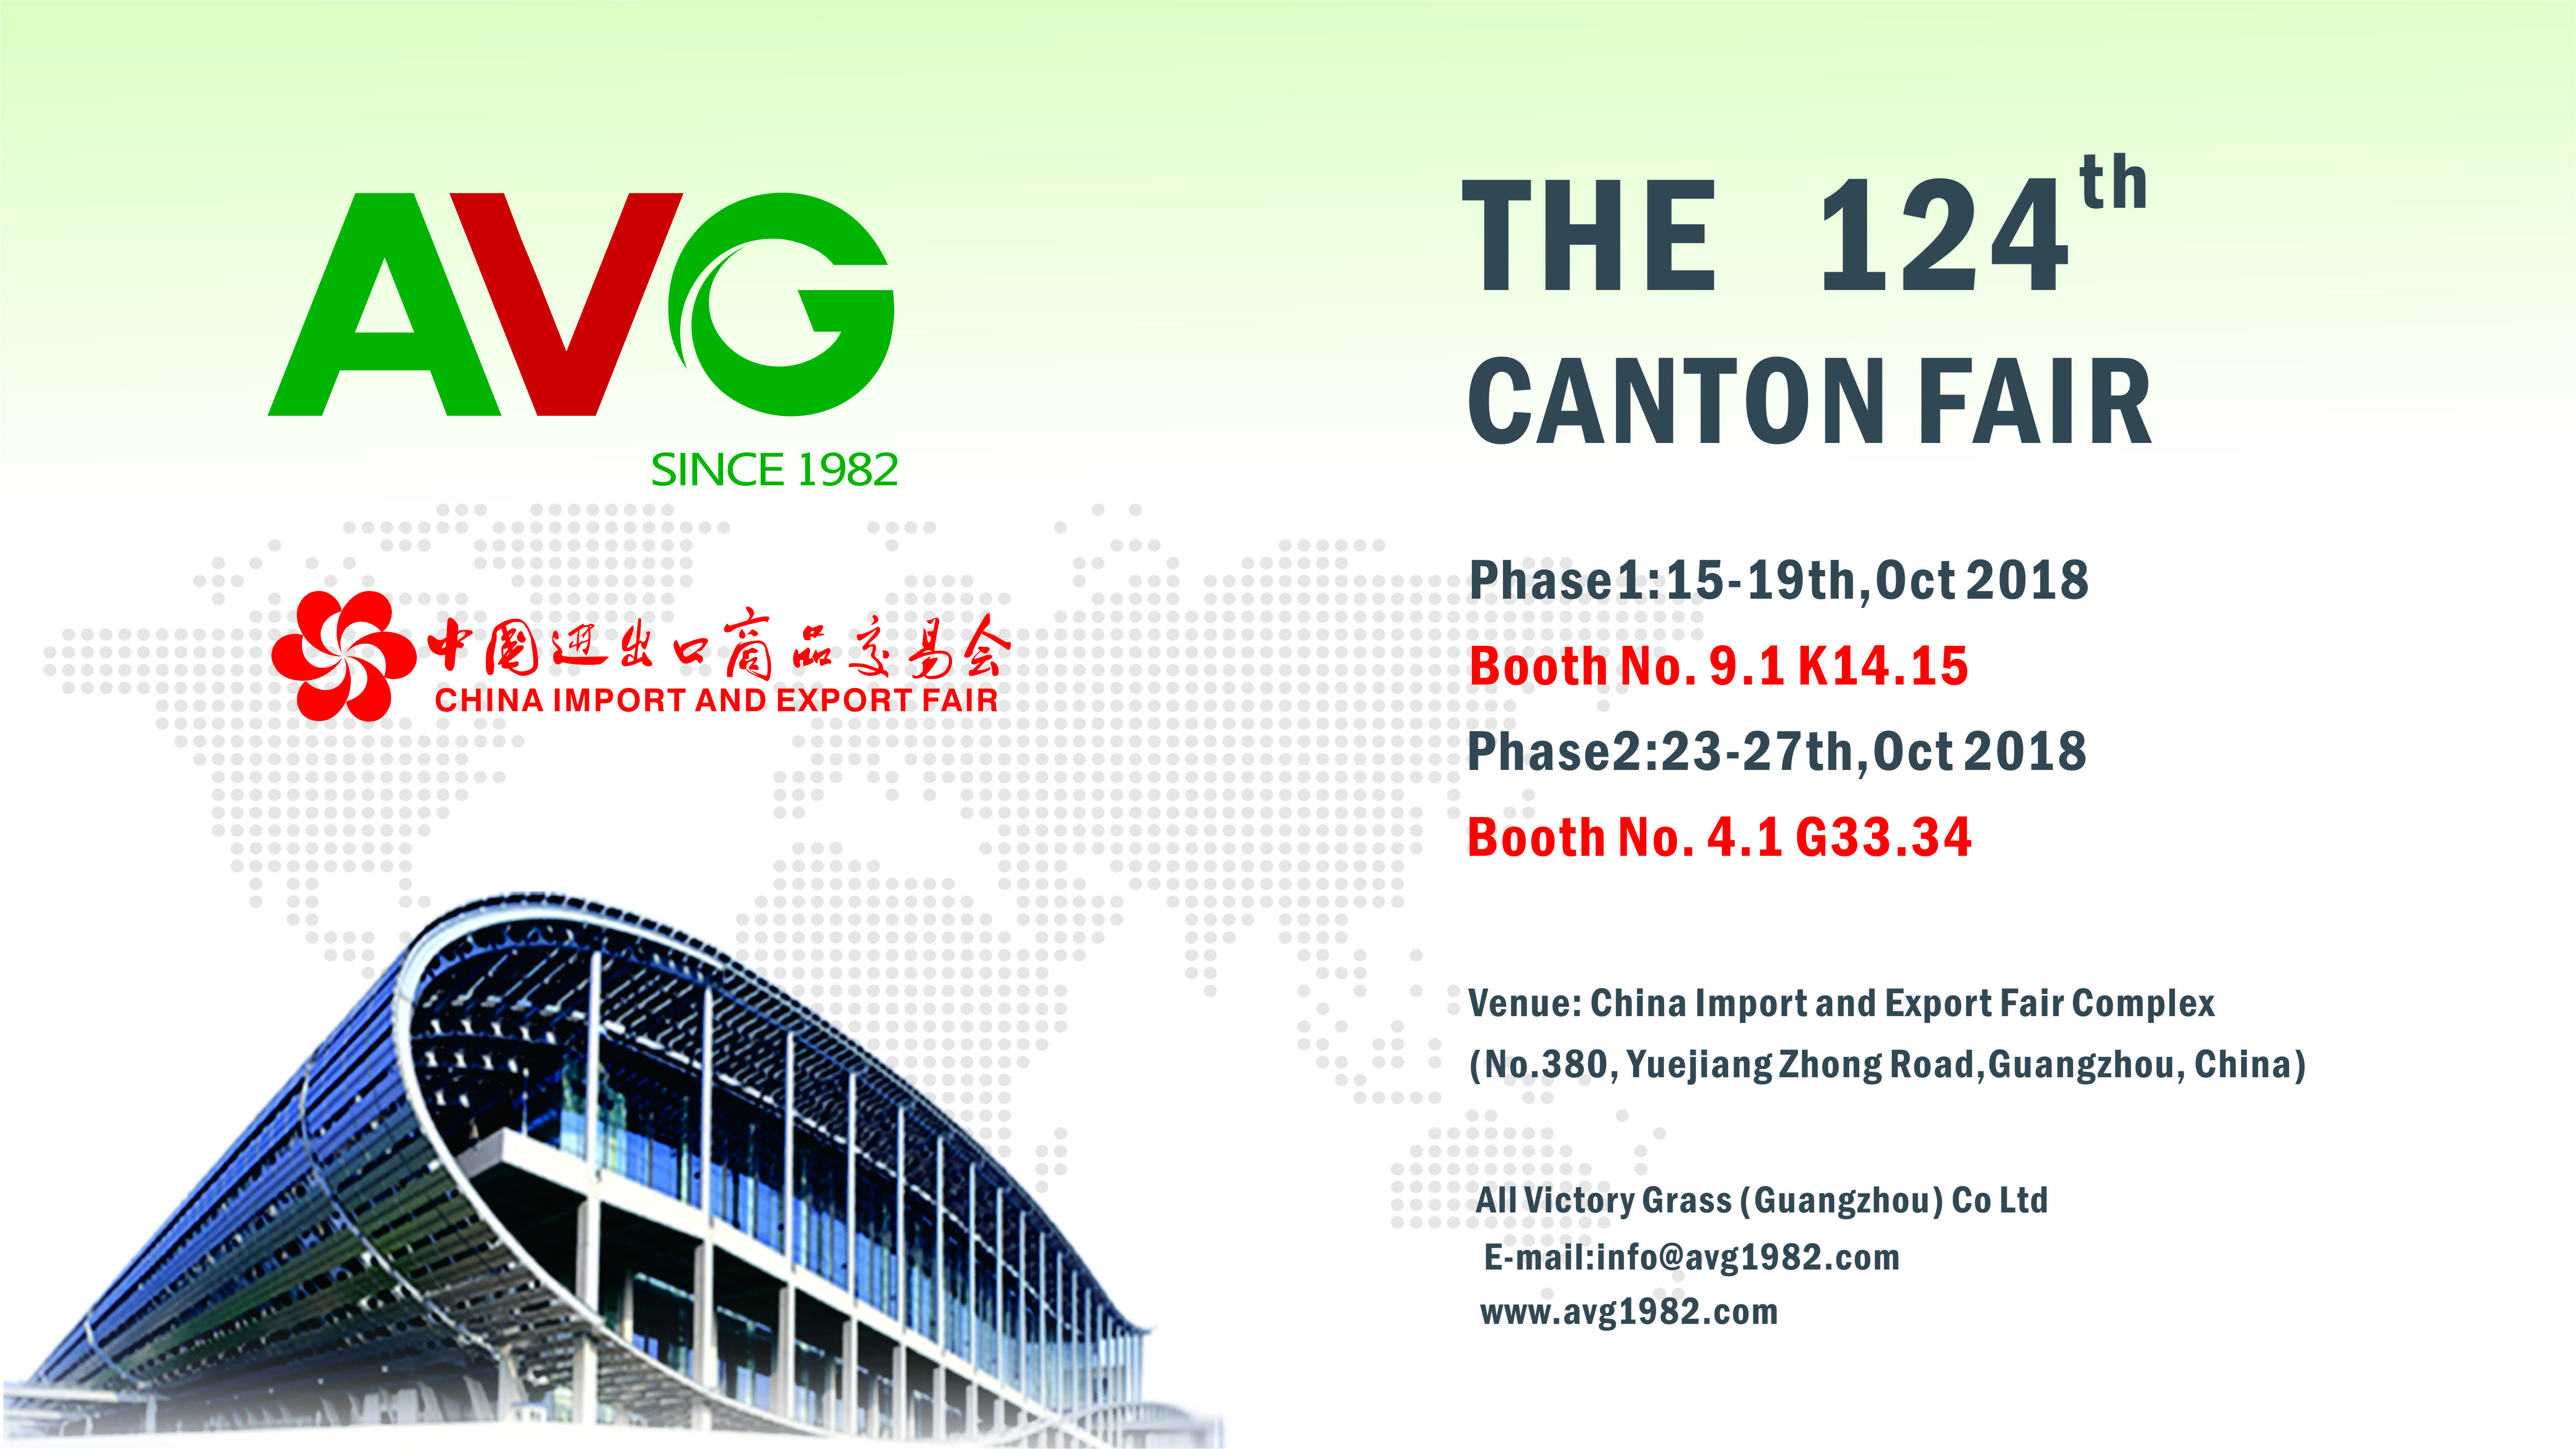 The 124th Canton Fair and the 12th Int’l Garden Expo Tokyo ended with success